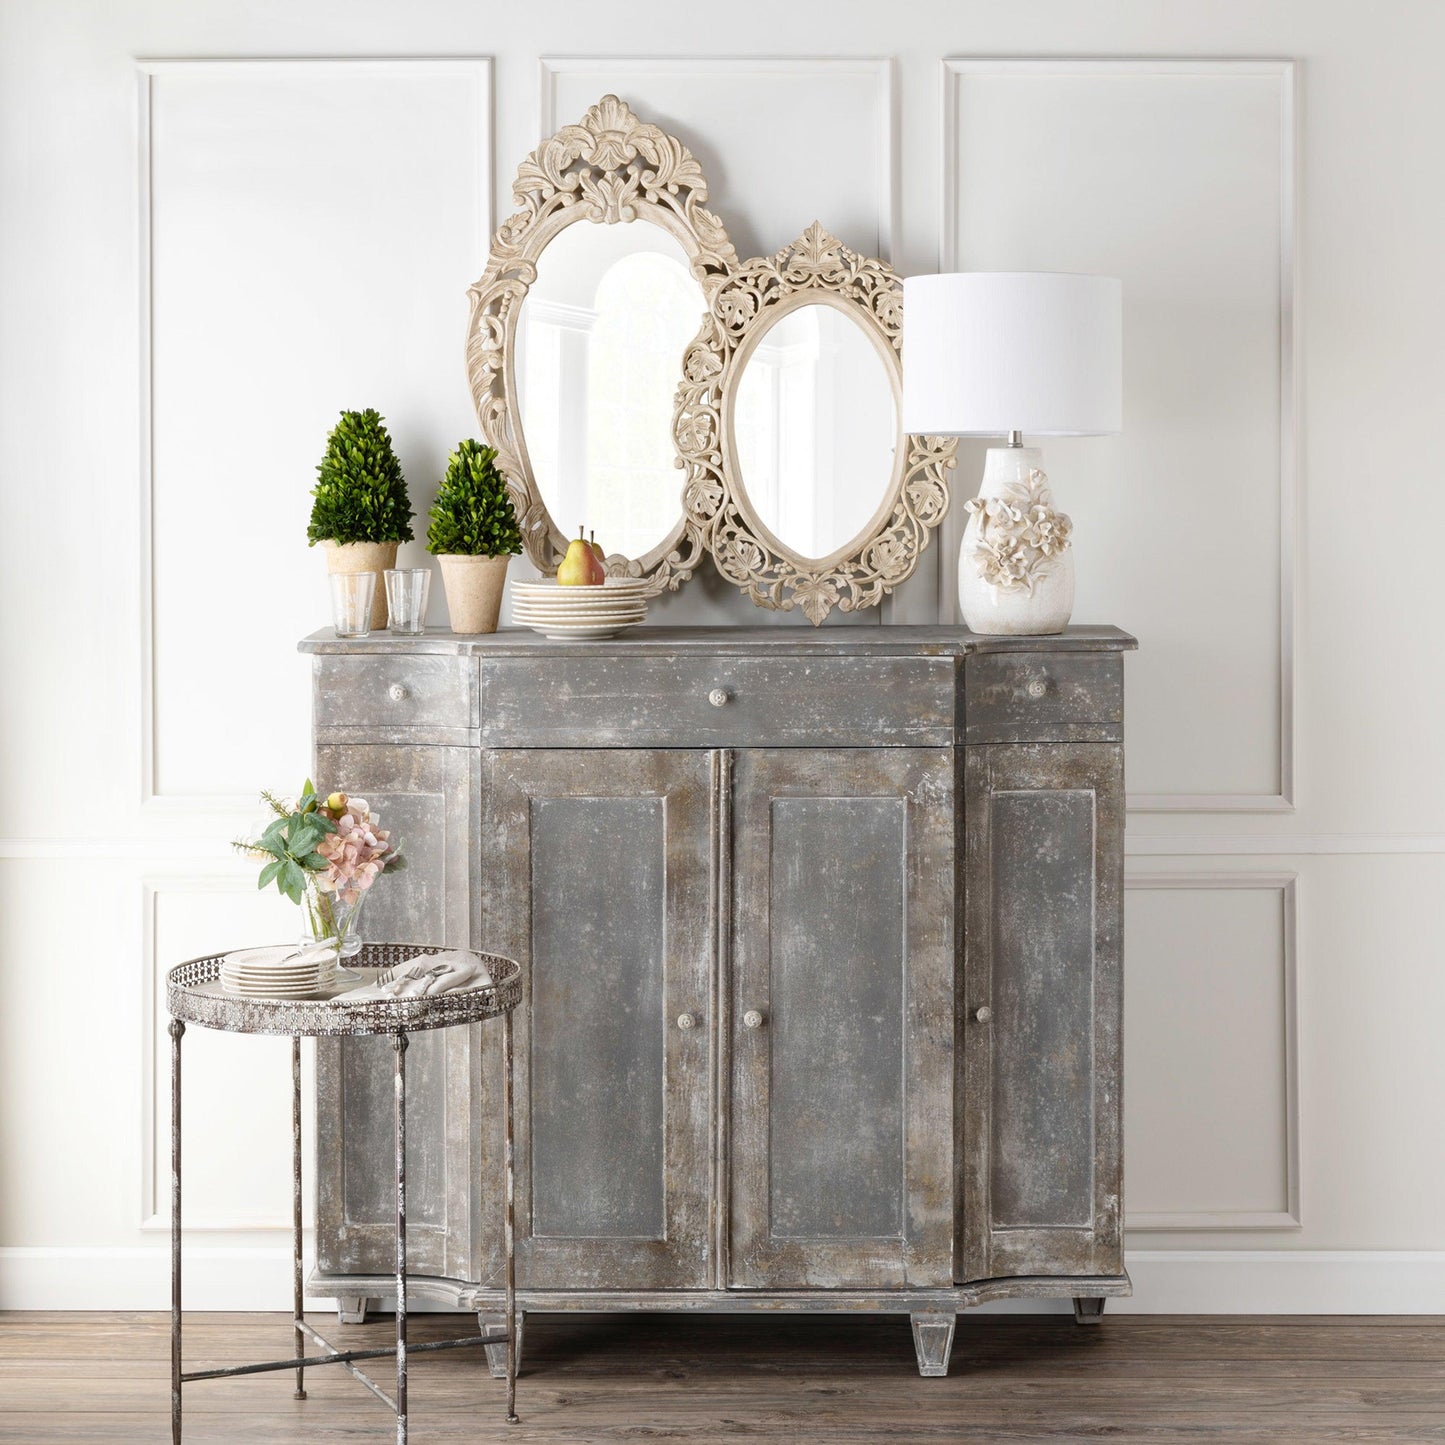 french-country-hand-carved-wood-mirror-mirrors-park-hill-2-Threadbare Gypsy Soul